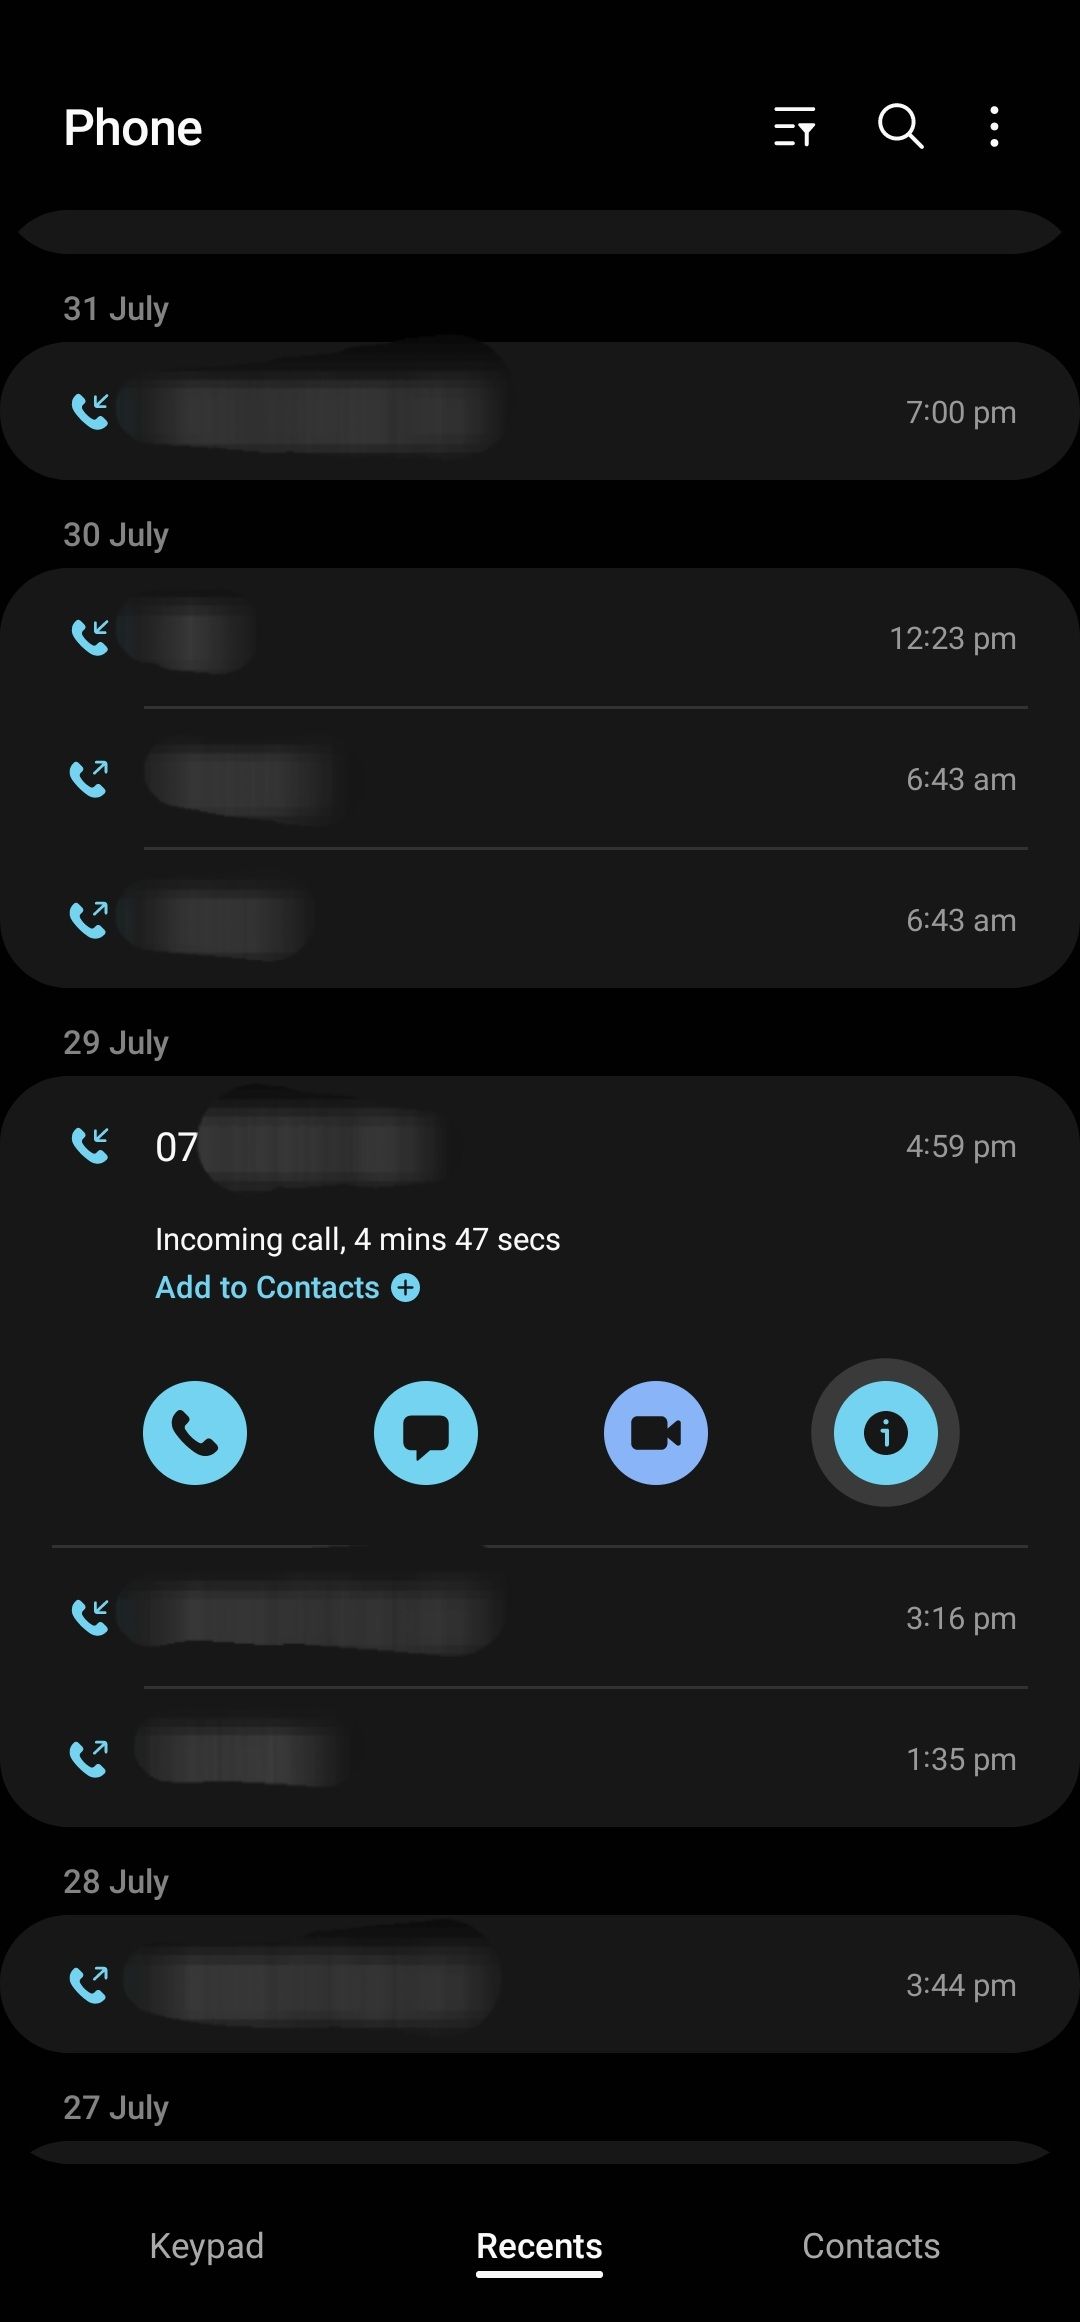 Blocking an unsaved contact from the Samsung Phone app